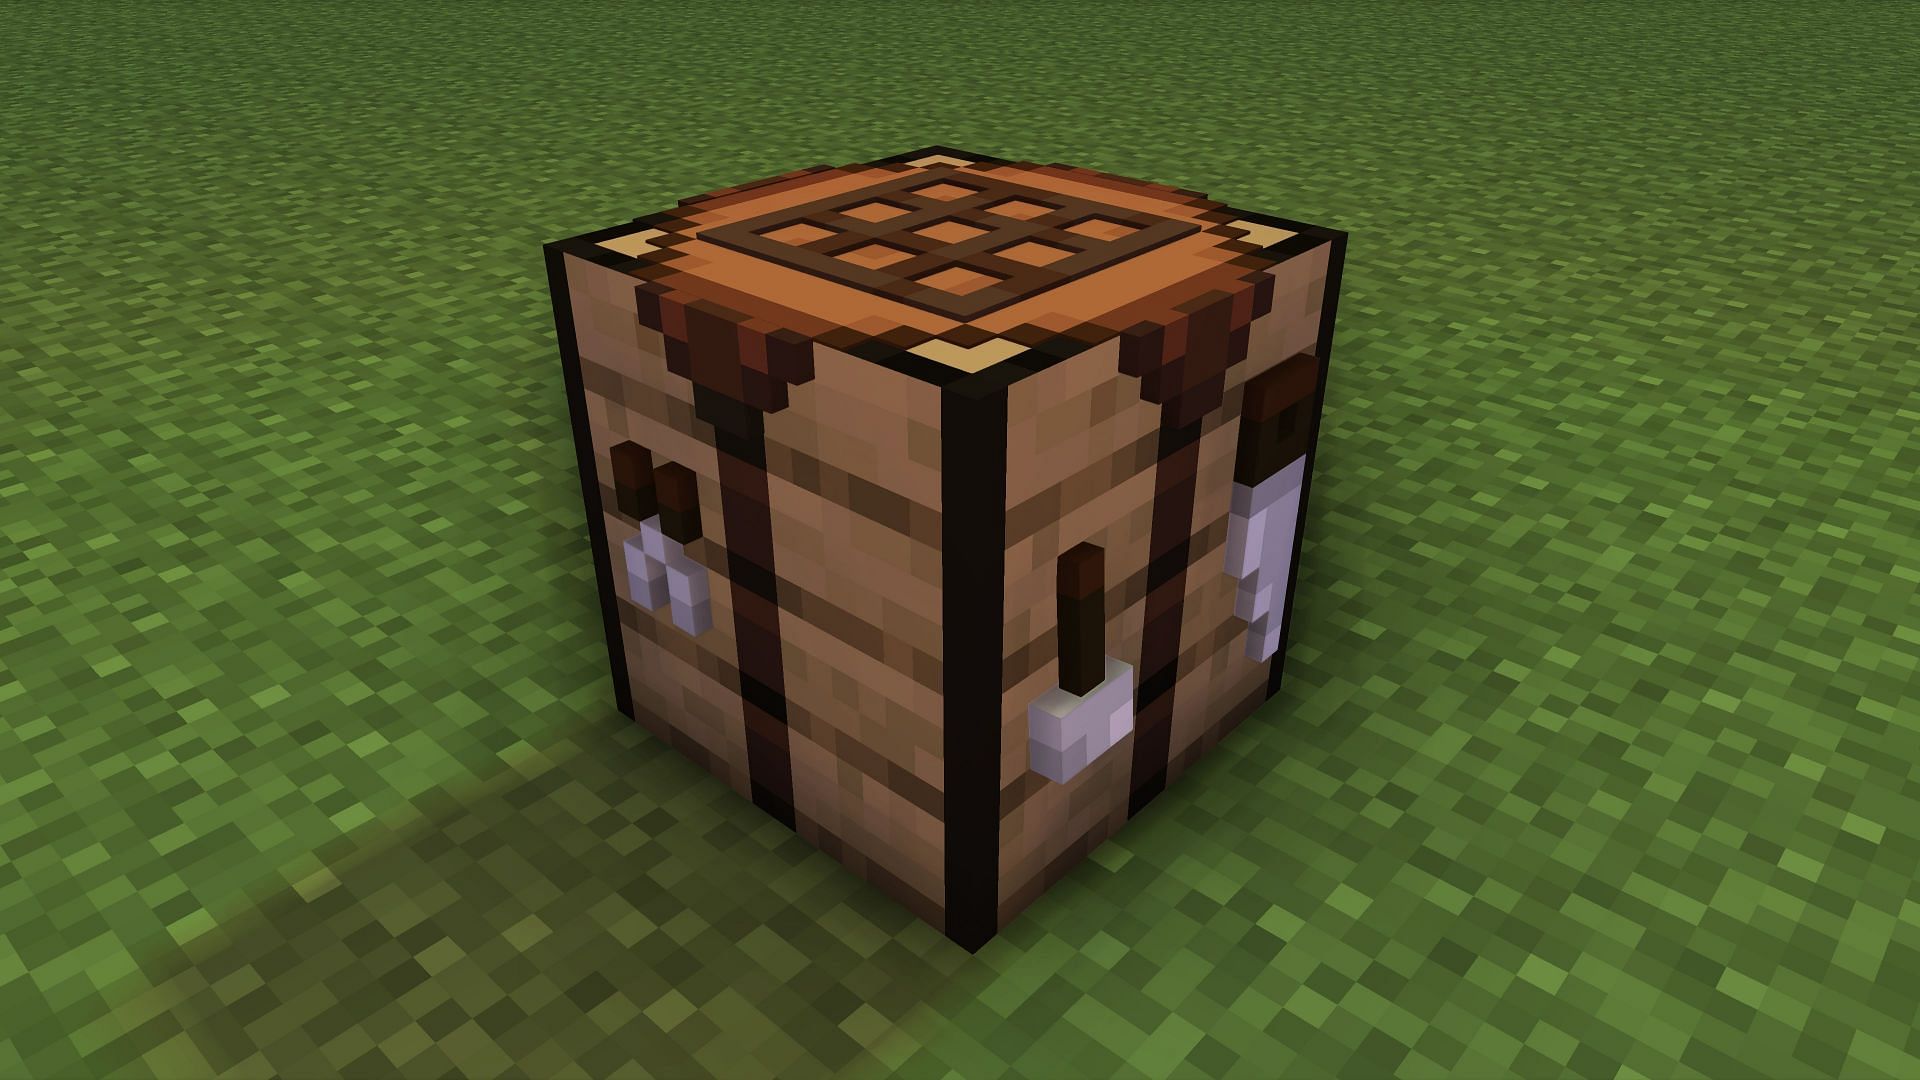 Crafting tables are a basic necessity in Minecraft (Image via Mojang)